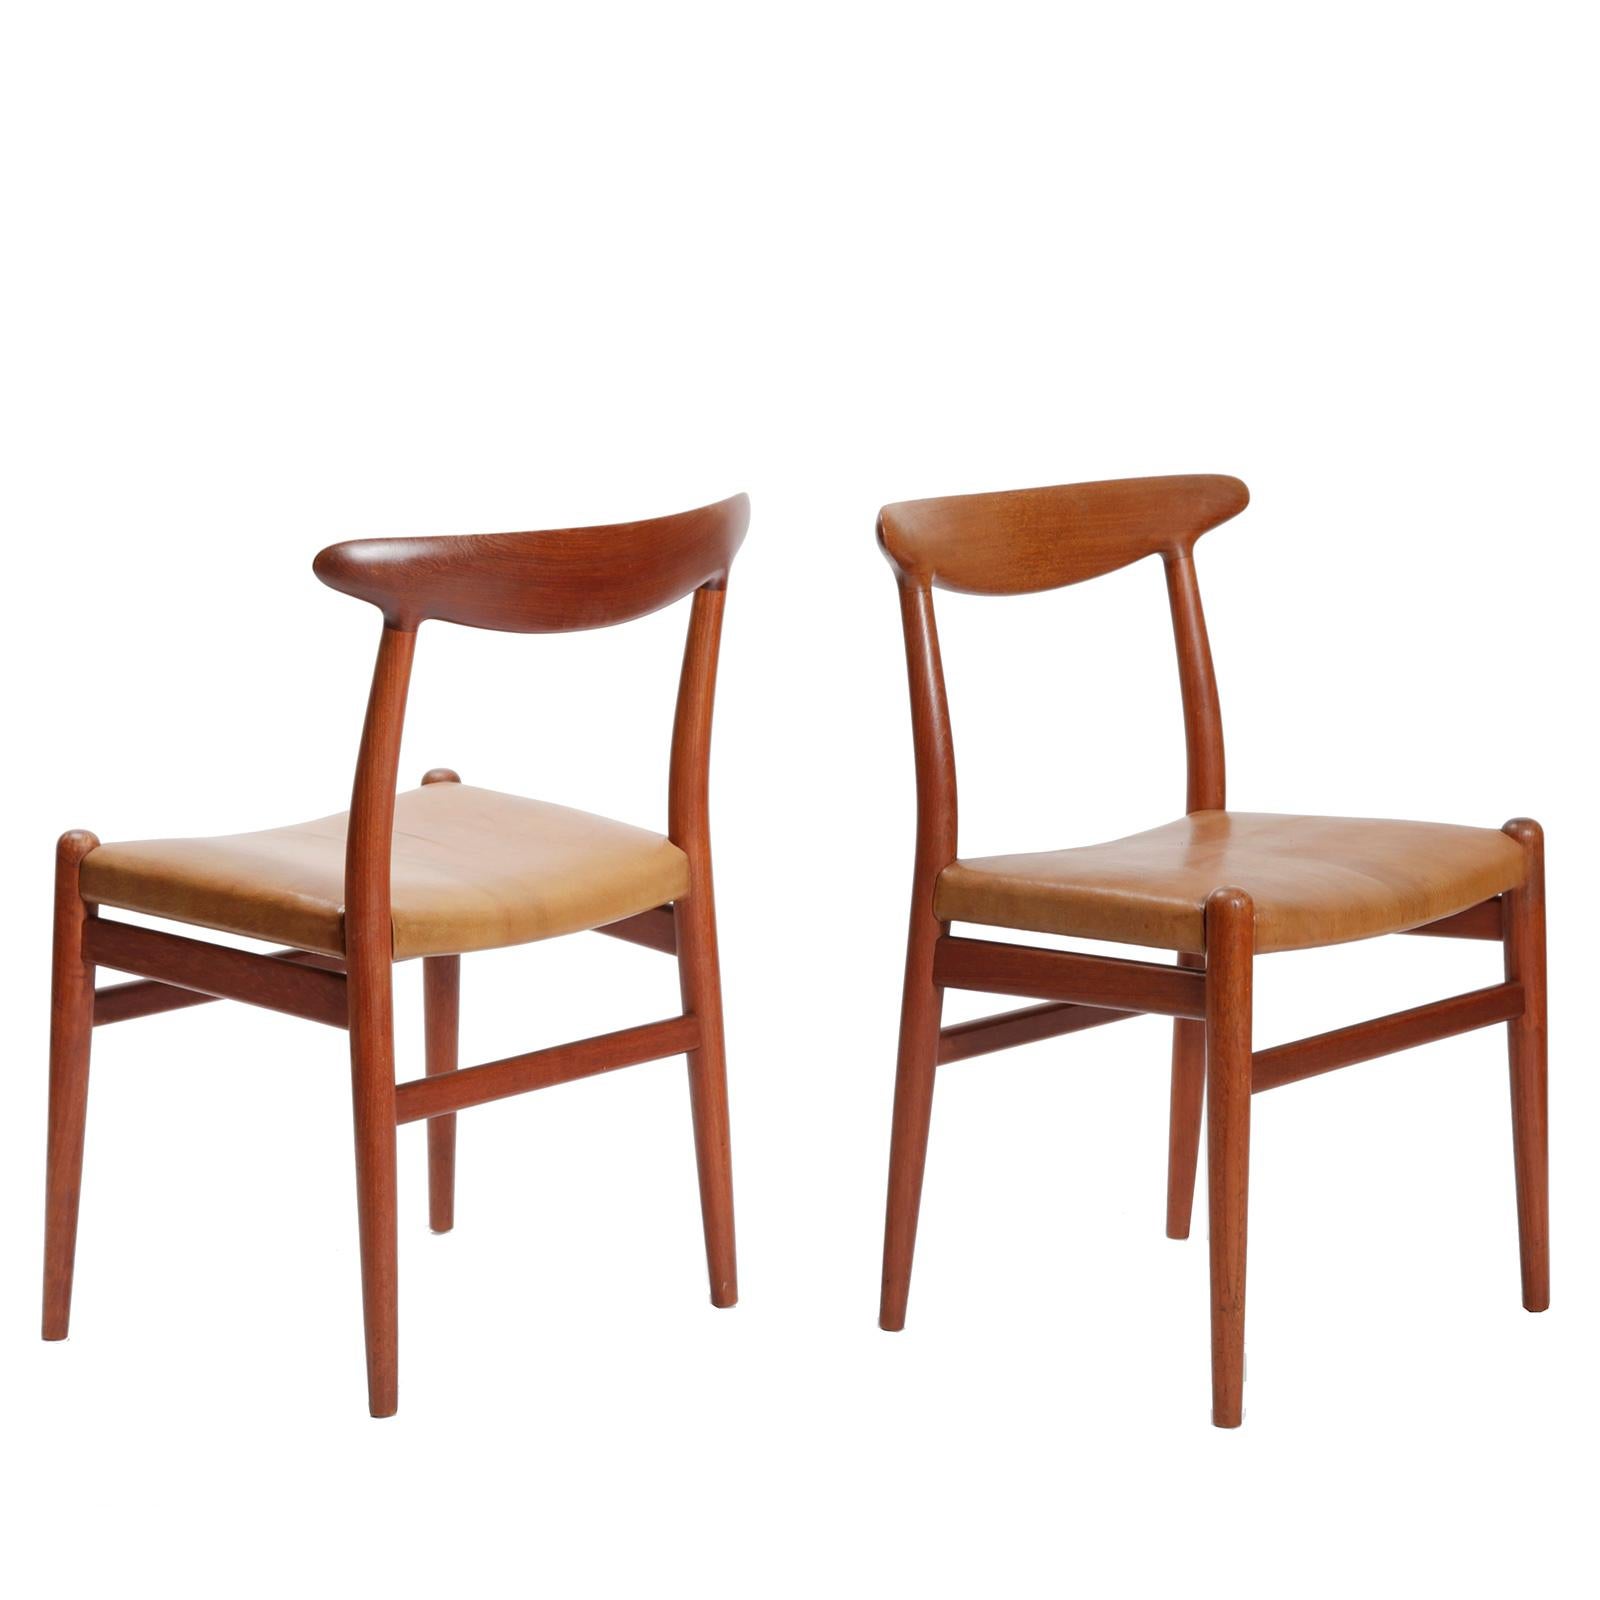 A set of four dining chairs, model W2, in teak with seat recovered in Niger goatskin.
Designed by Hans Wegner in 1950 and beautifully crafted by cabinetmaker C.M. Madsen, Denmark.